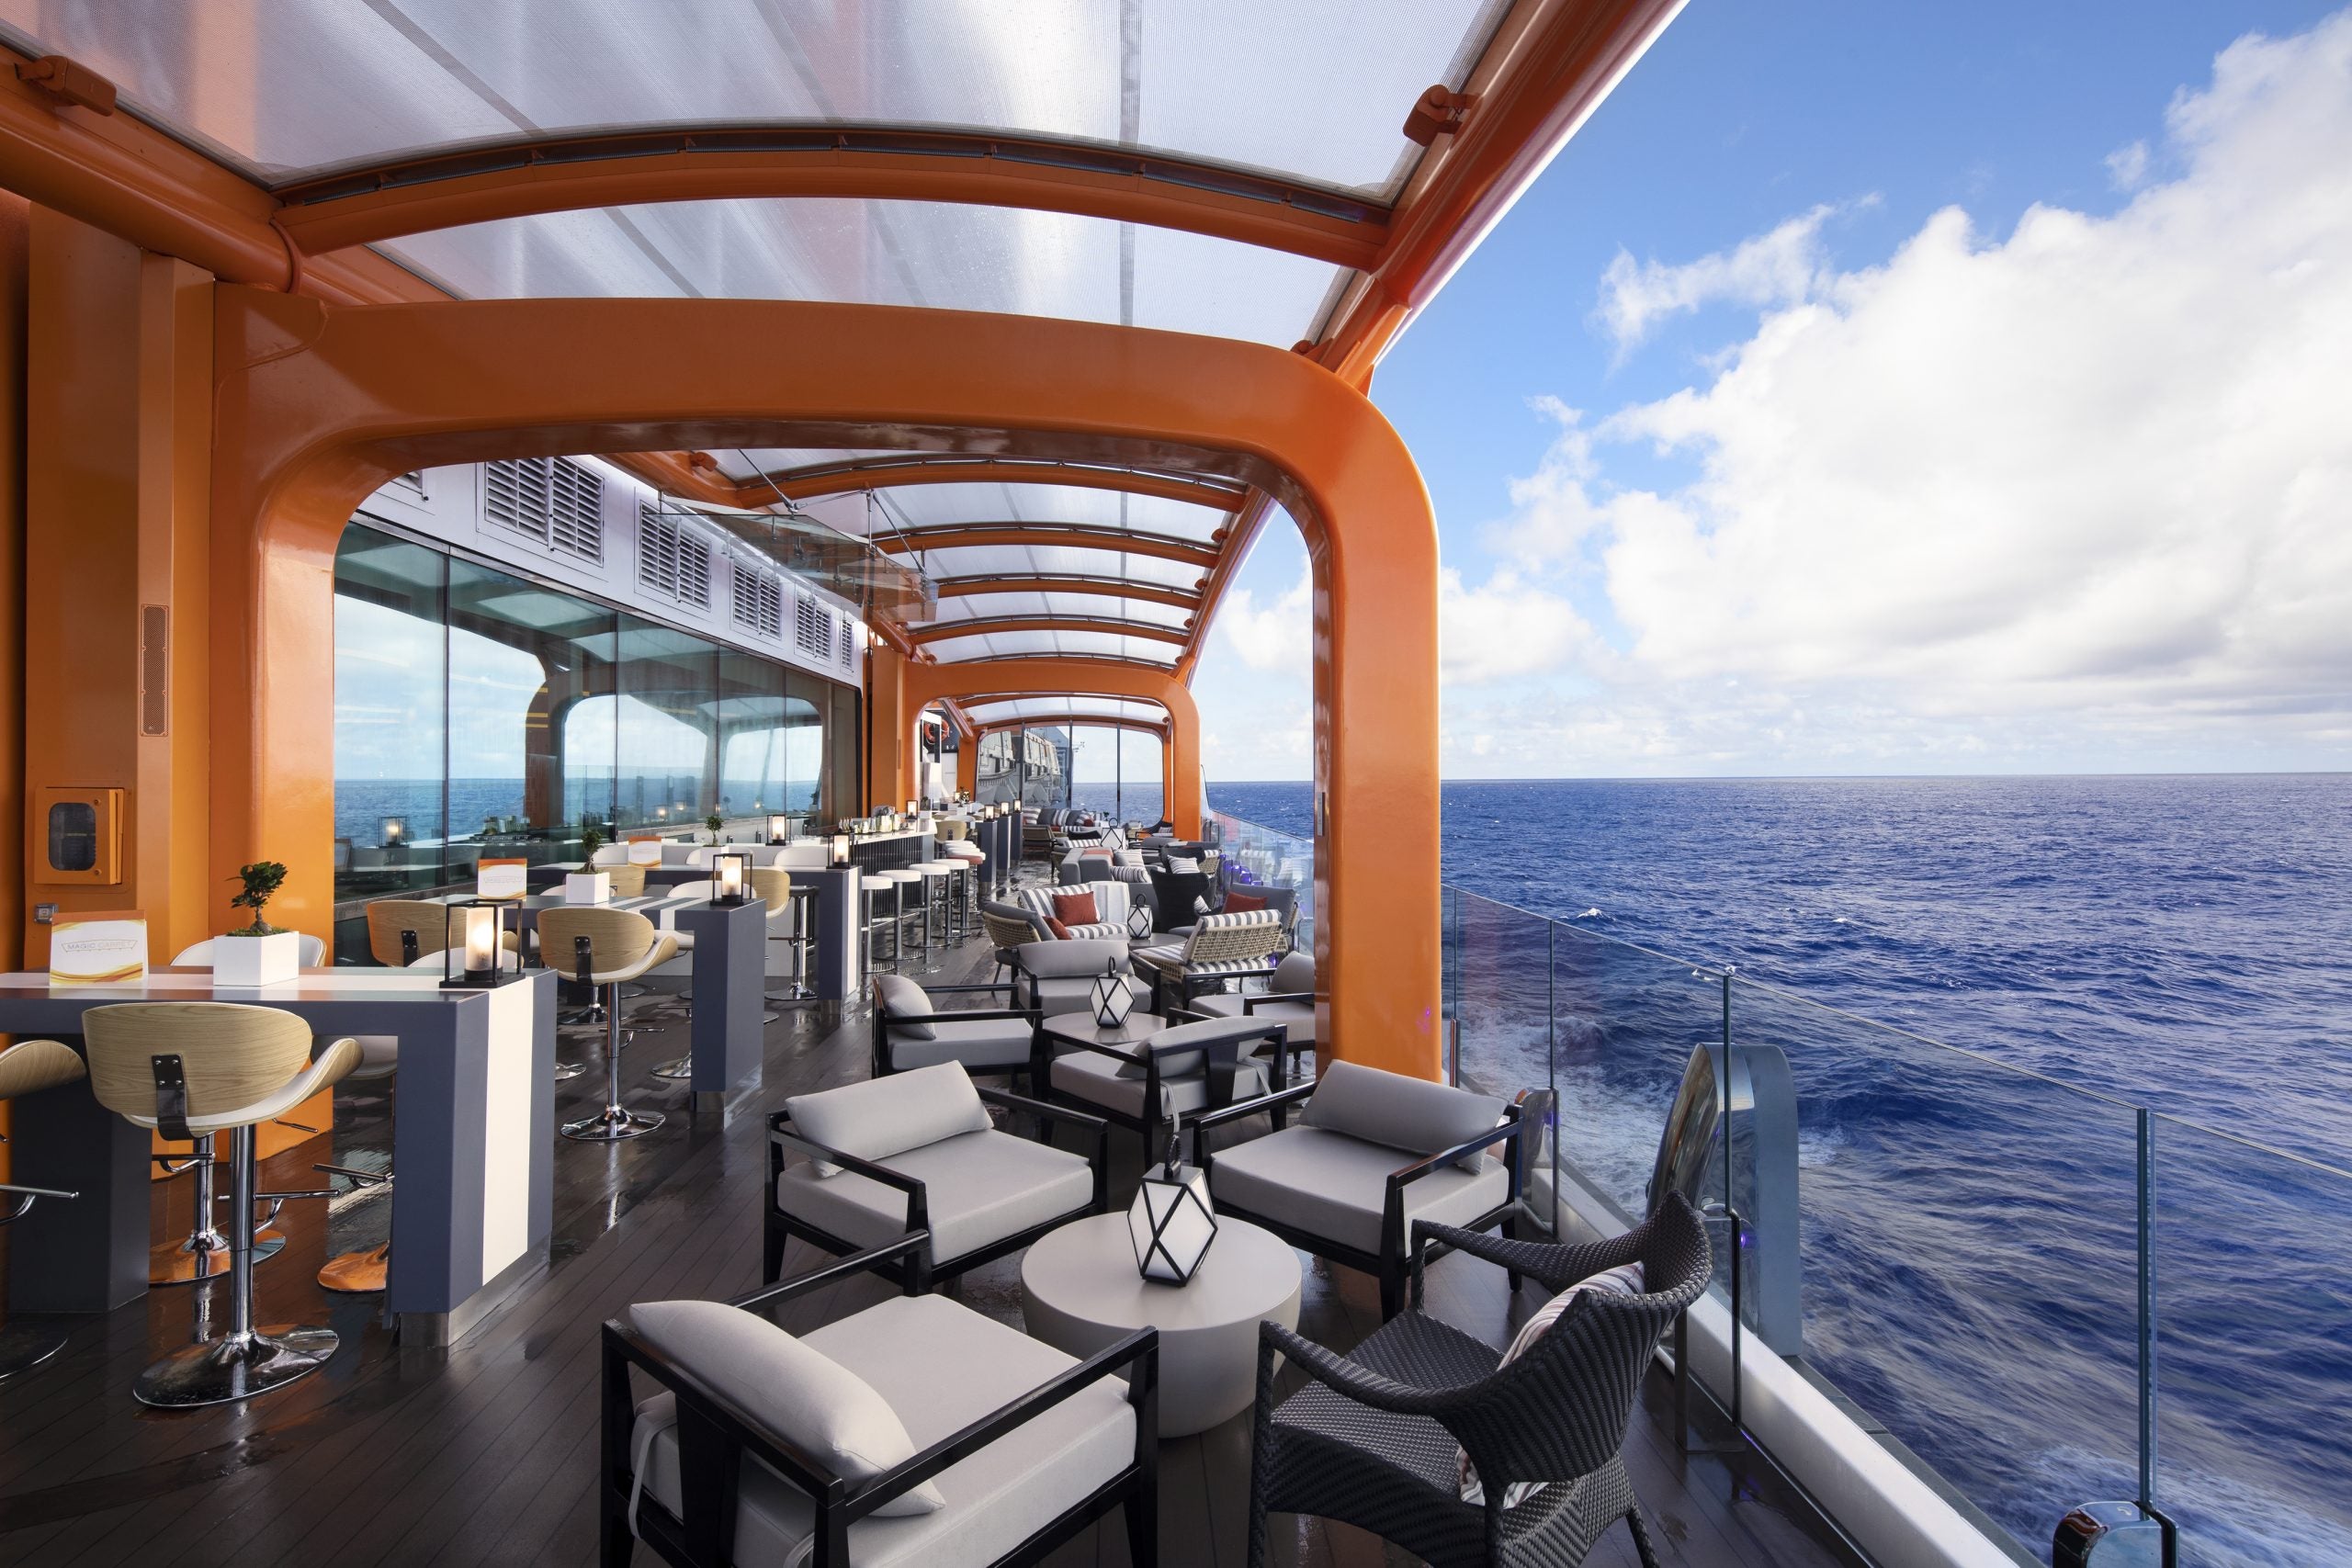 celebrity cruises questions